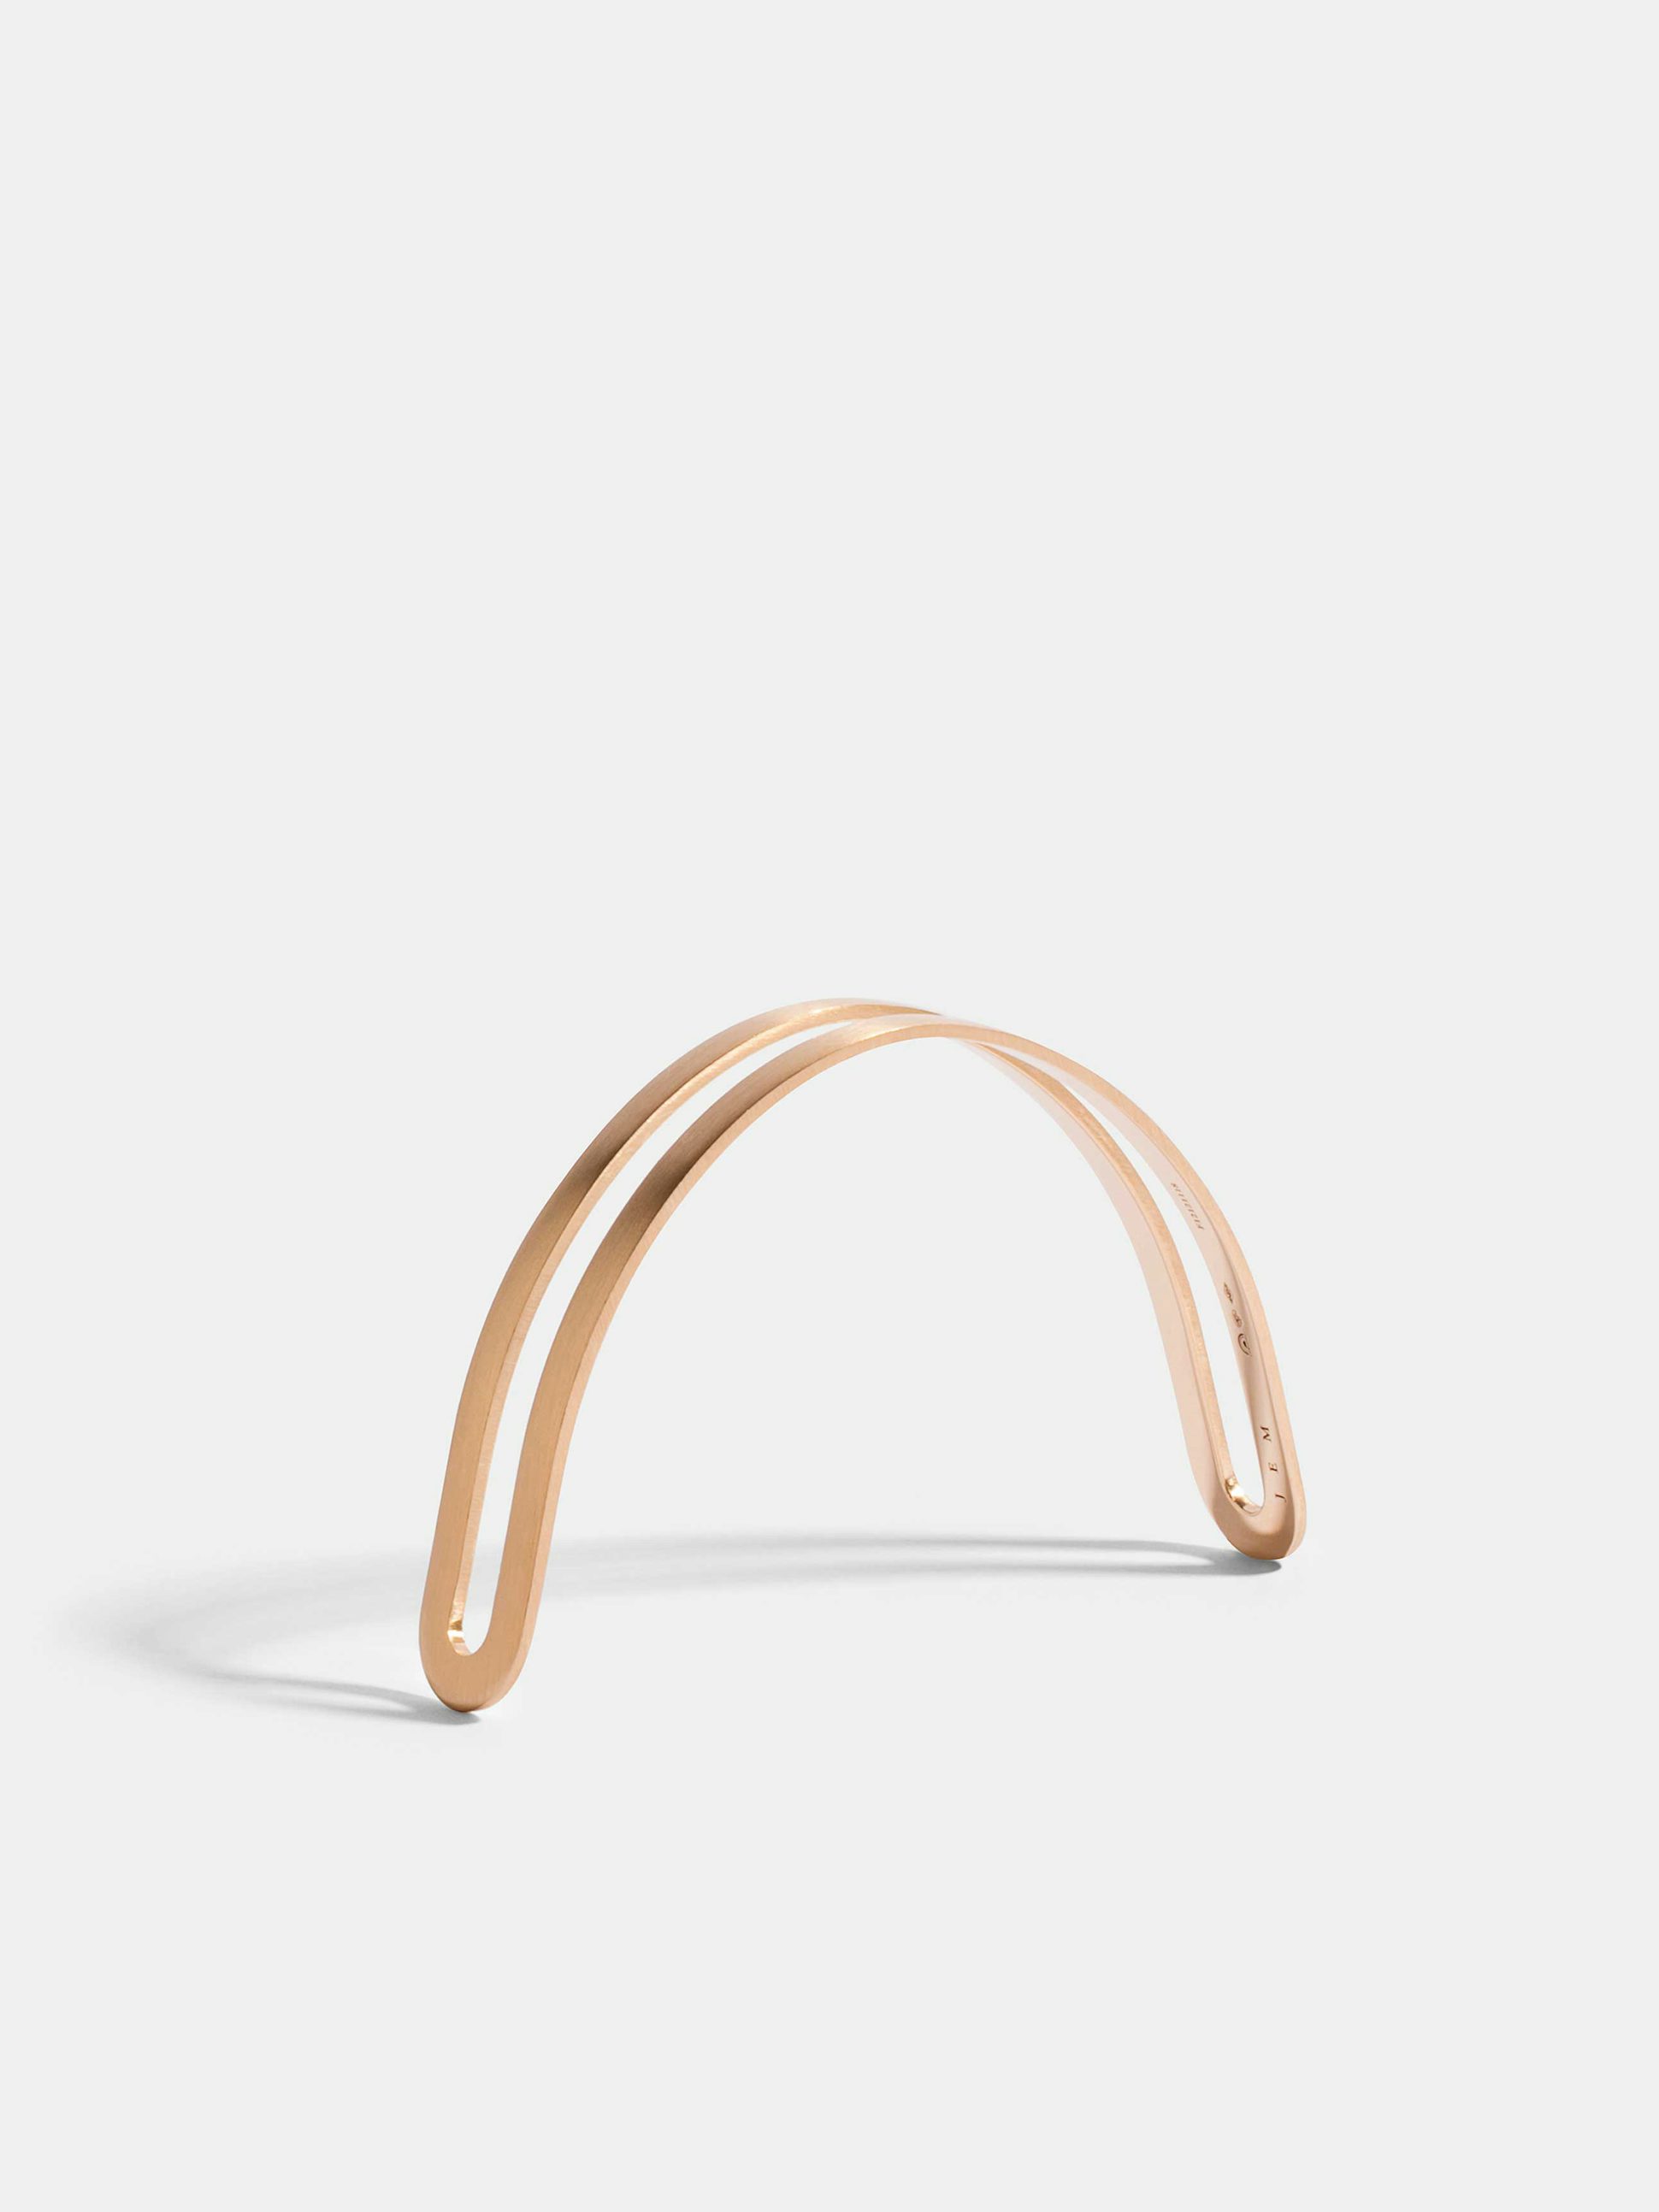 Étreintes simple half-bracelet in 18k Fairmined ethical rose gold with a brushed finish.